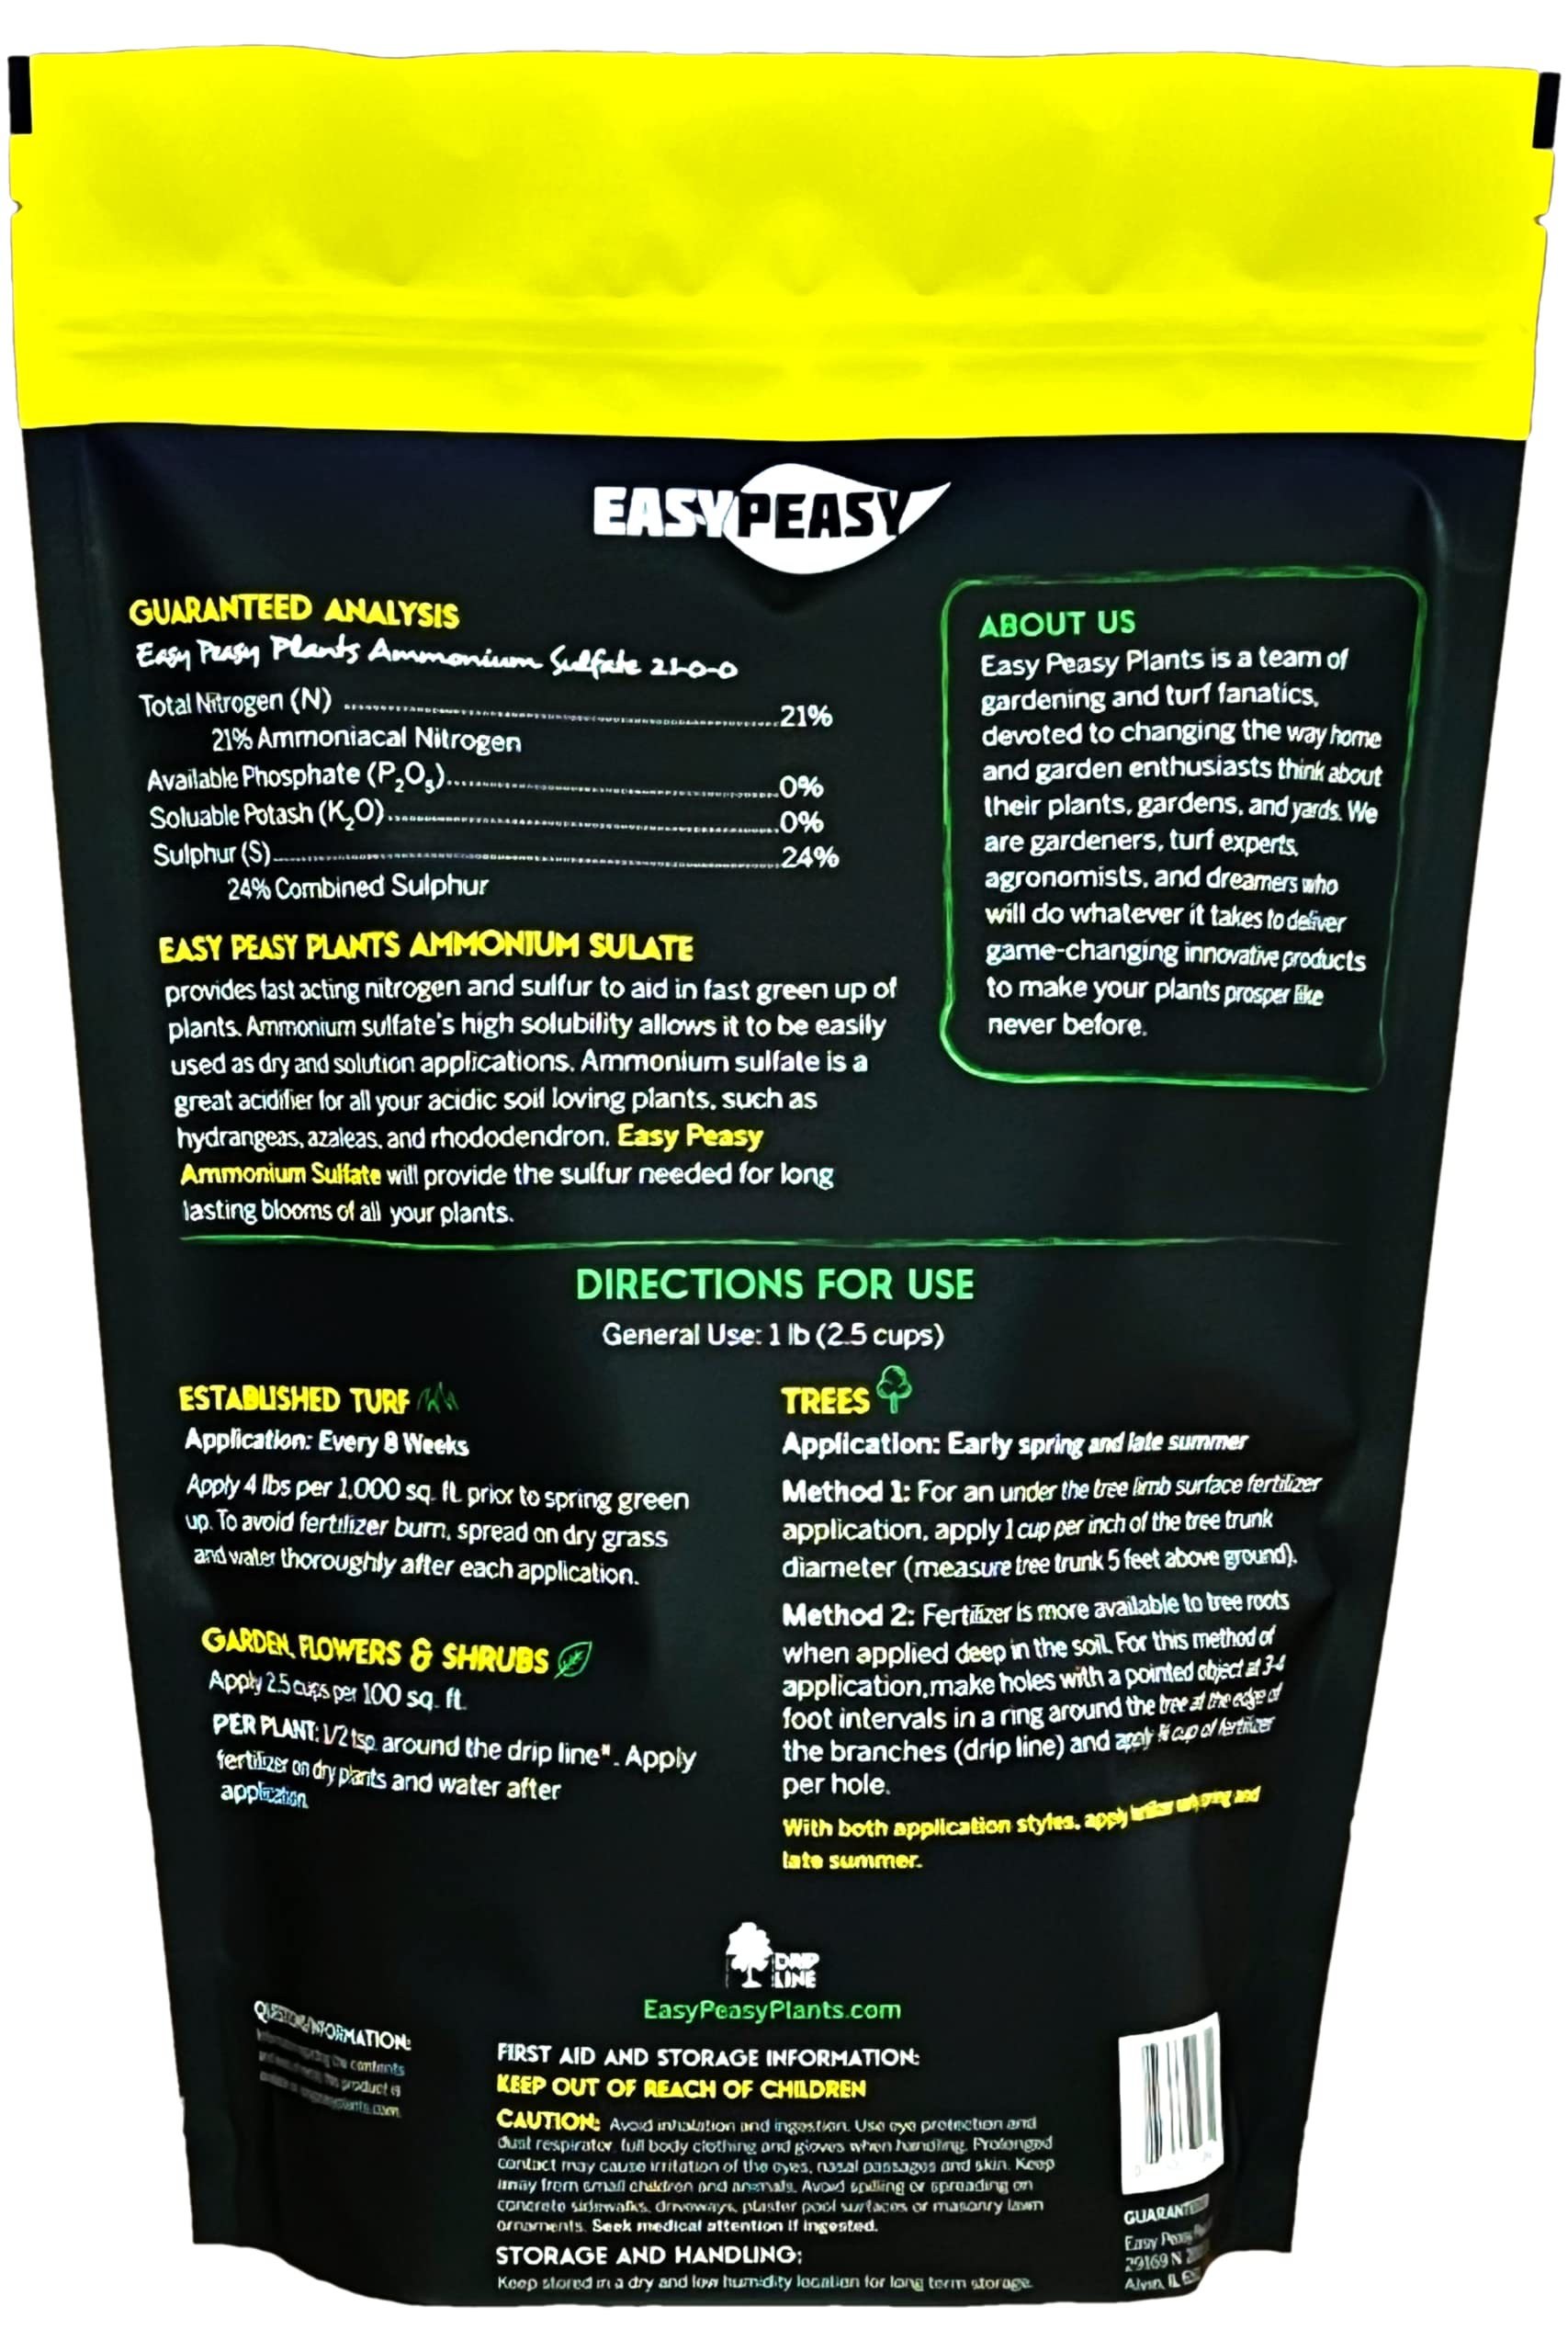 Easy Peasy Plants Ammonium Sulfate - 21-0-0 24S NUTRIENT PLANT FOOD BLEND FOR DEEP GREEN PLANTS AND COLORFUL BLOOMS - great fertilizer soil acidifier for azaleas blueberries magnolia and more (5 POUNDS)